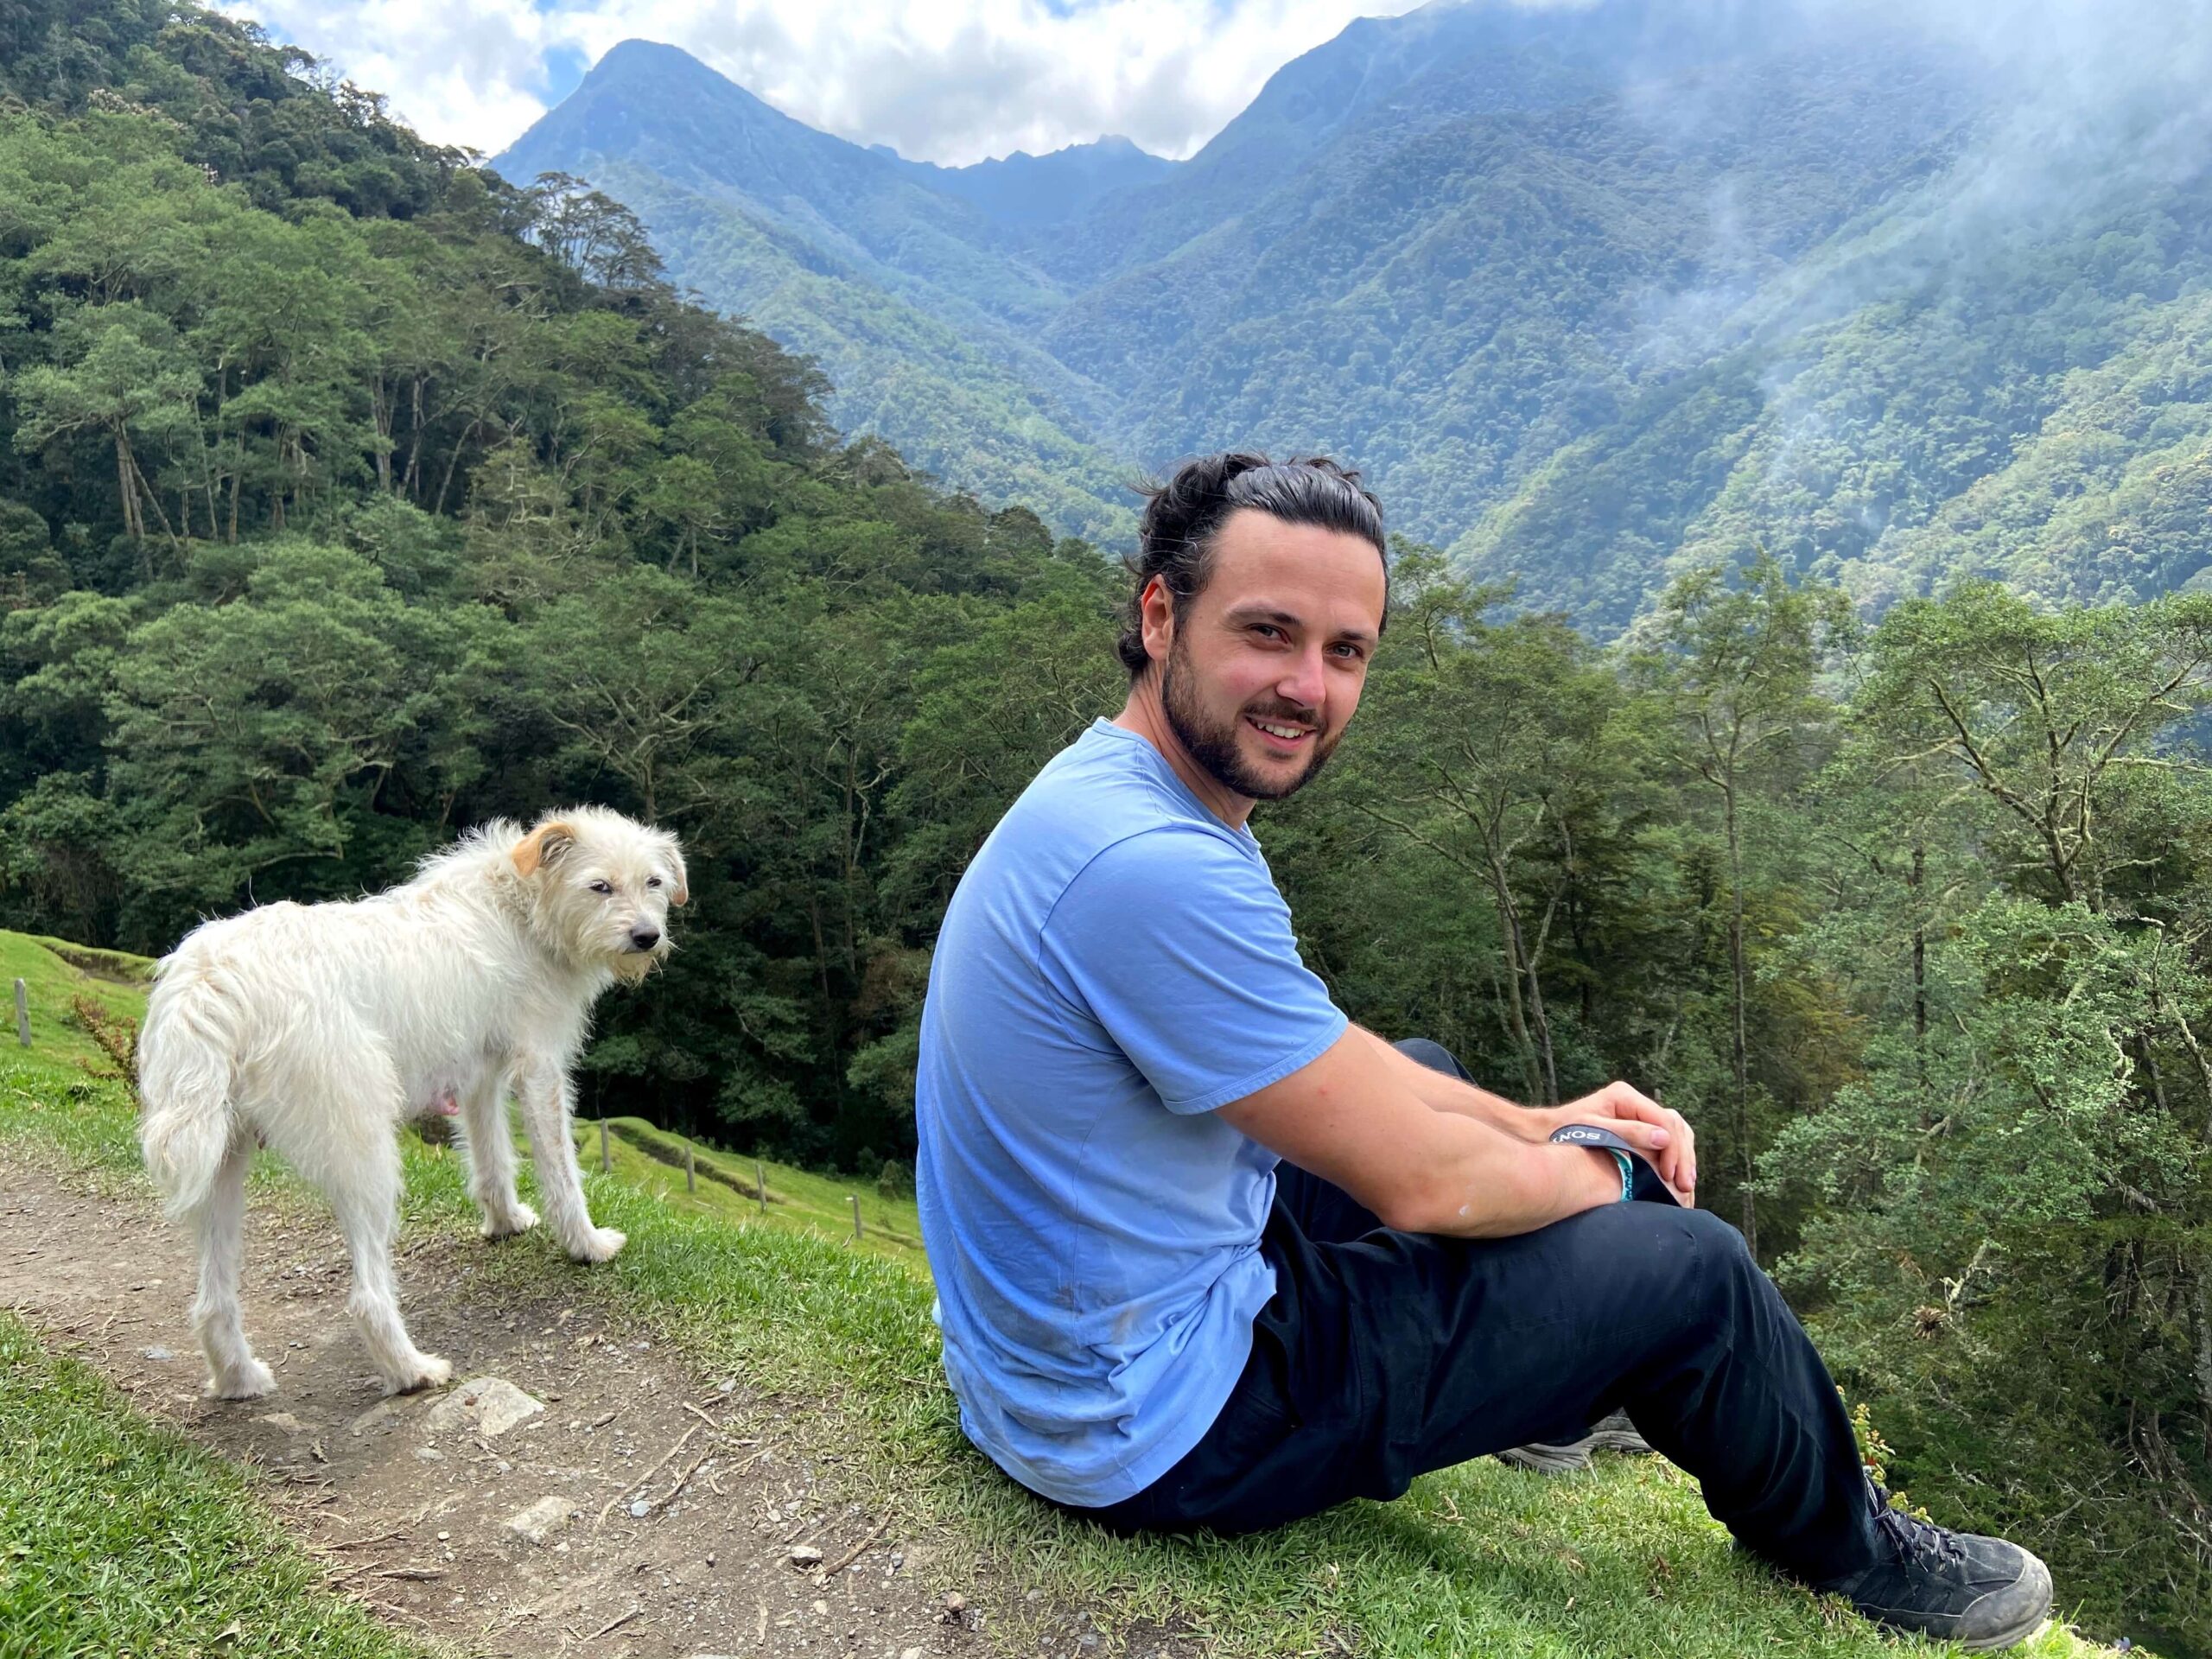 Alex & local farm dog with the jungle mountainsides behind.